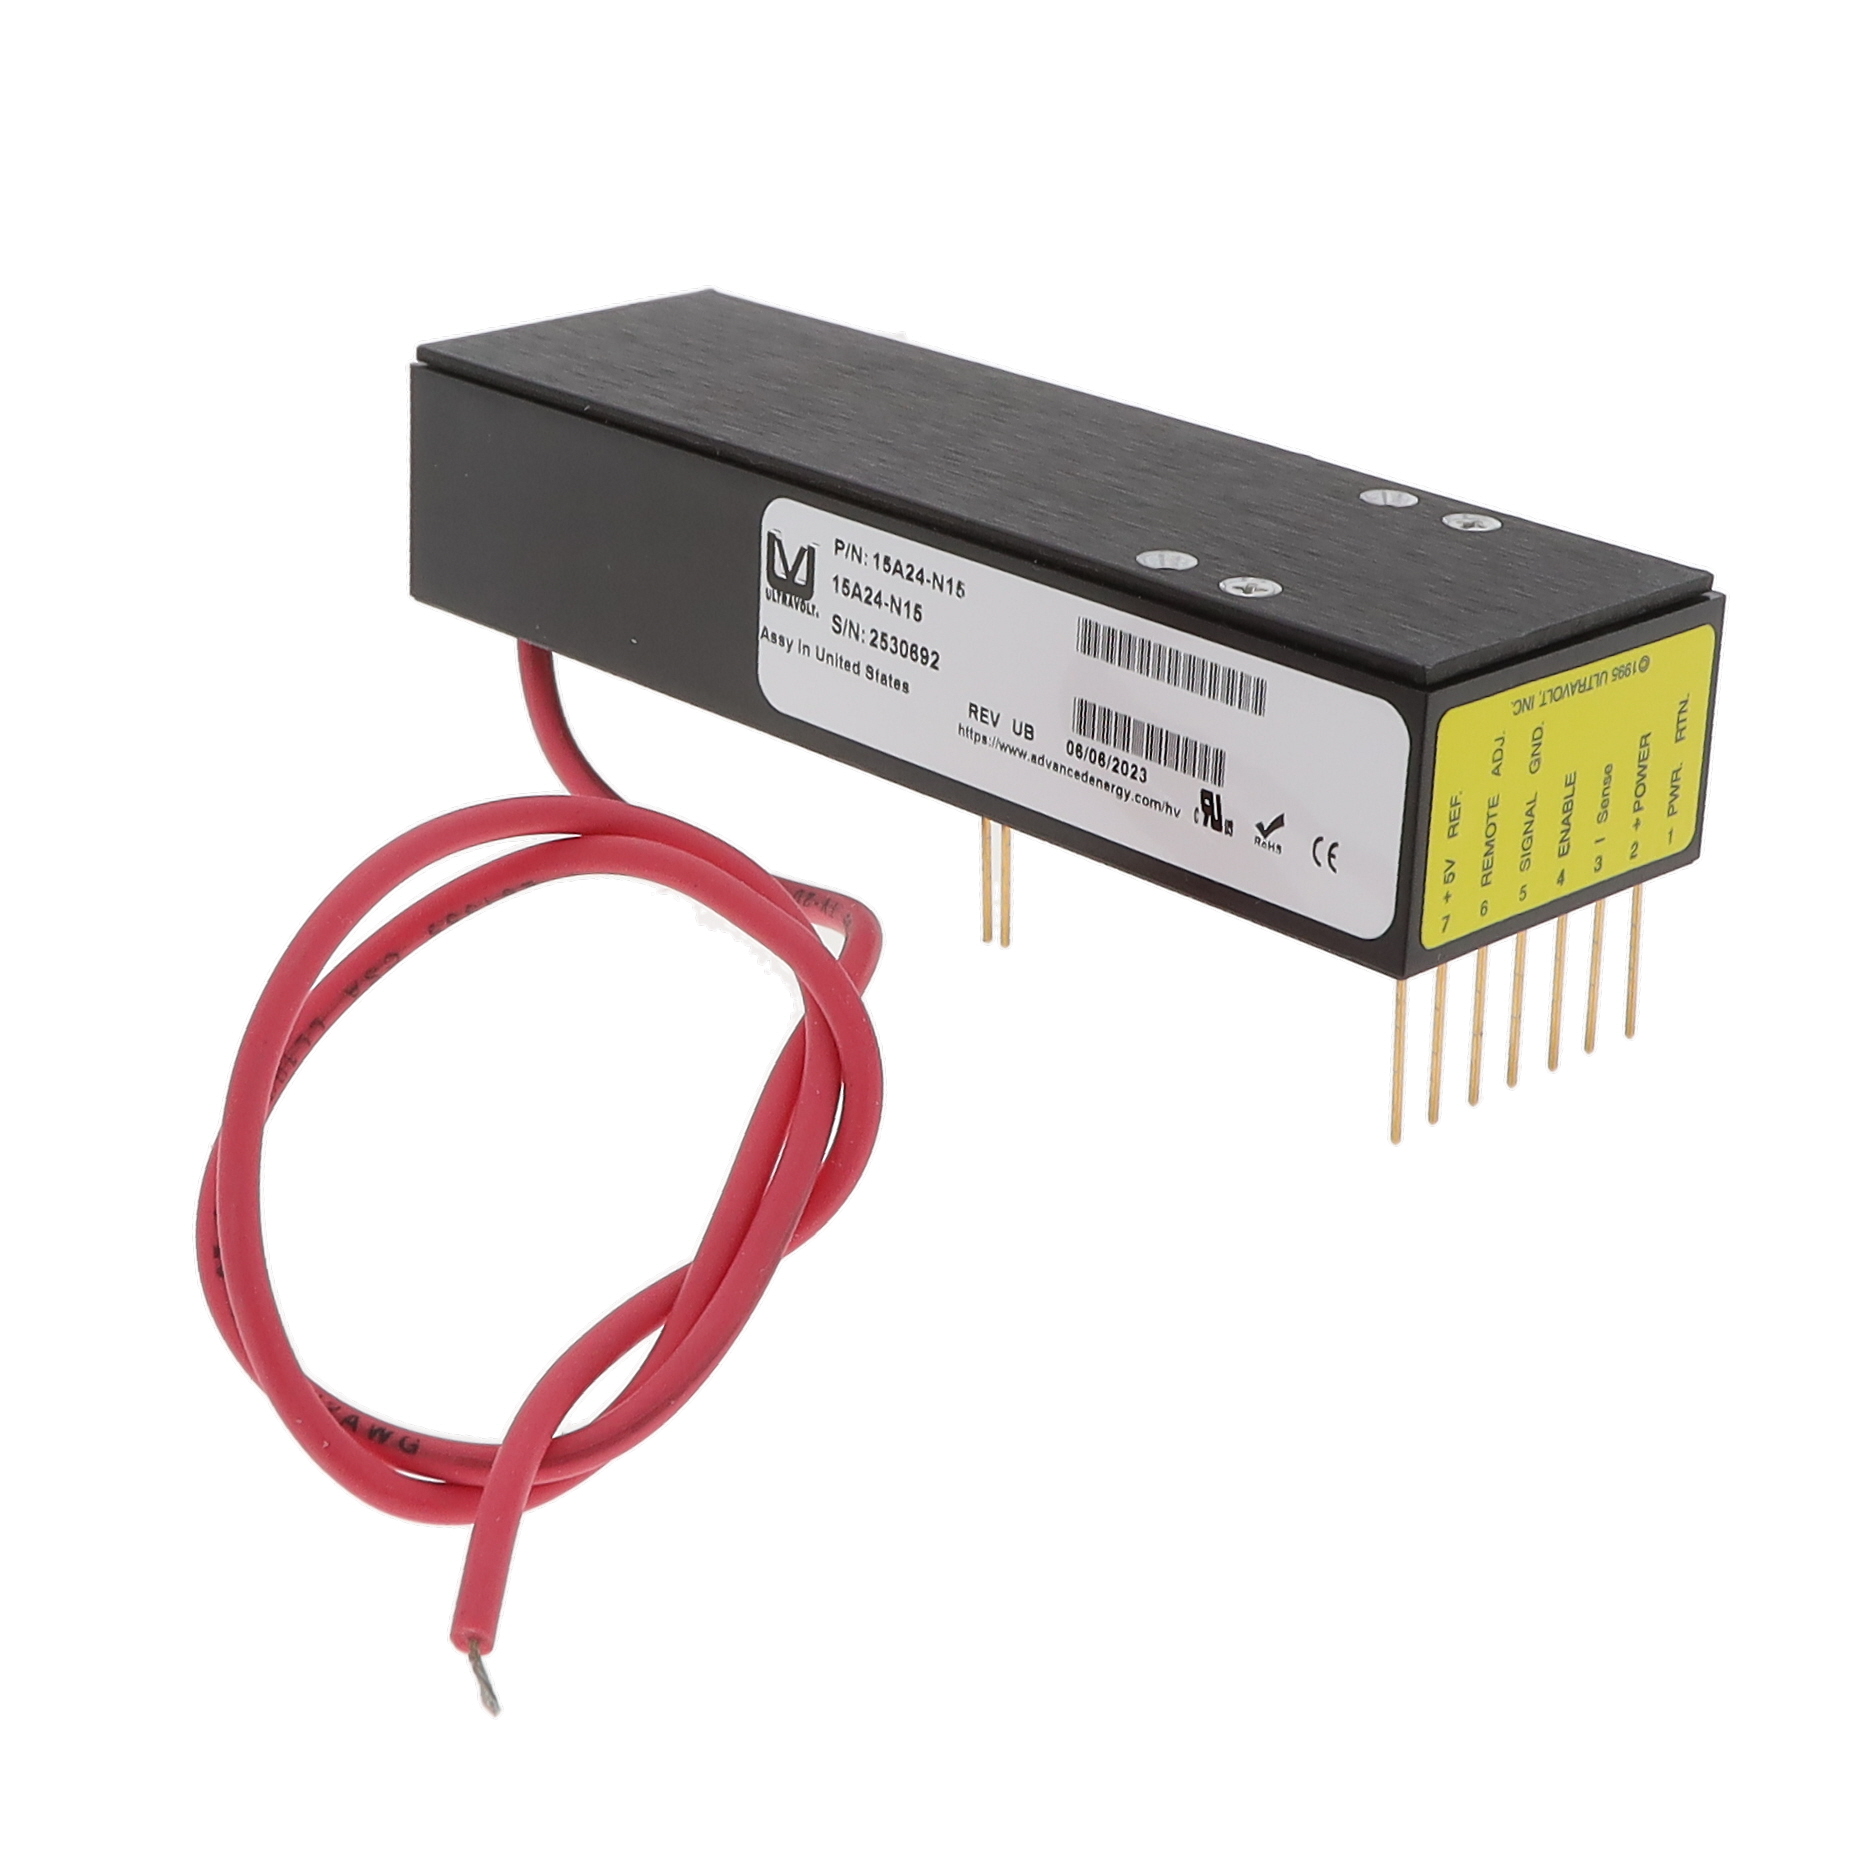 【15A24-N15-1】A-SERIES DC TO HVDC CONVERTER, S